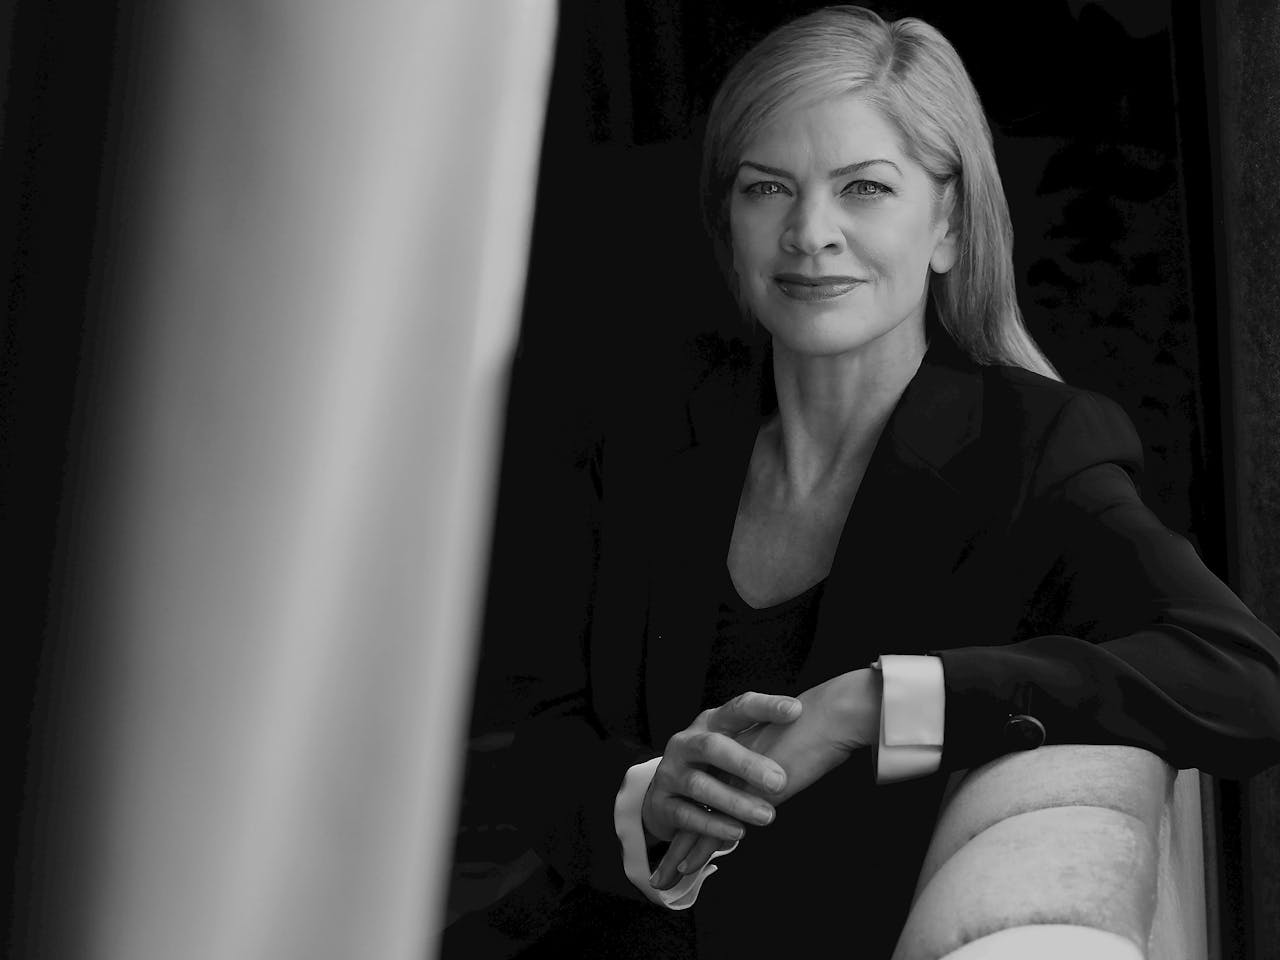 Black and white headshot of Canadian conductor Keri-Lynn Wilson. Keri has blonde air and is wearing a black suit jacket. She is sitting on a padded sofa and her arm is placed on the backrest as she smiles for the camera.